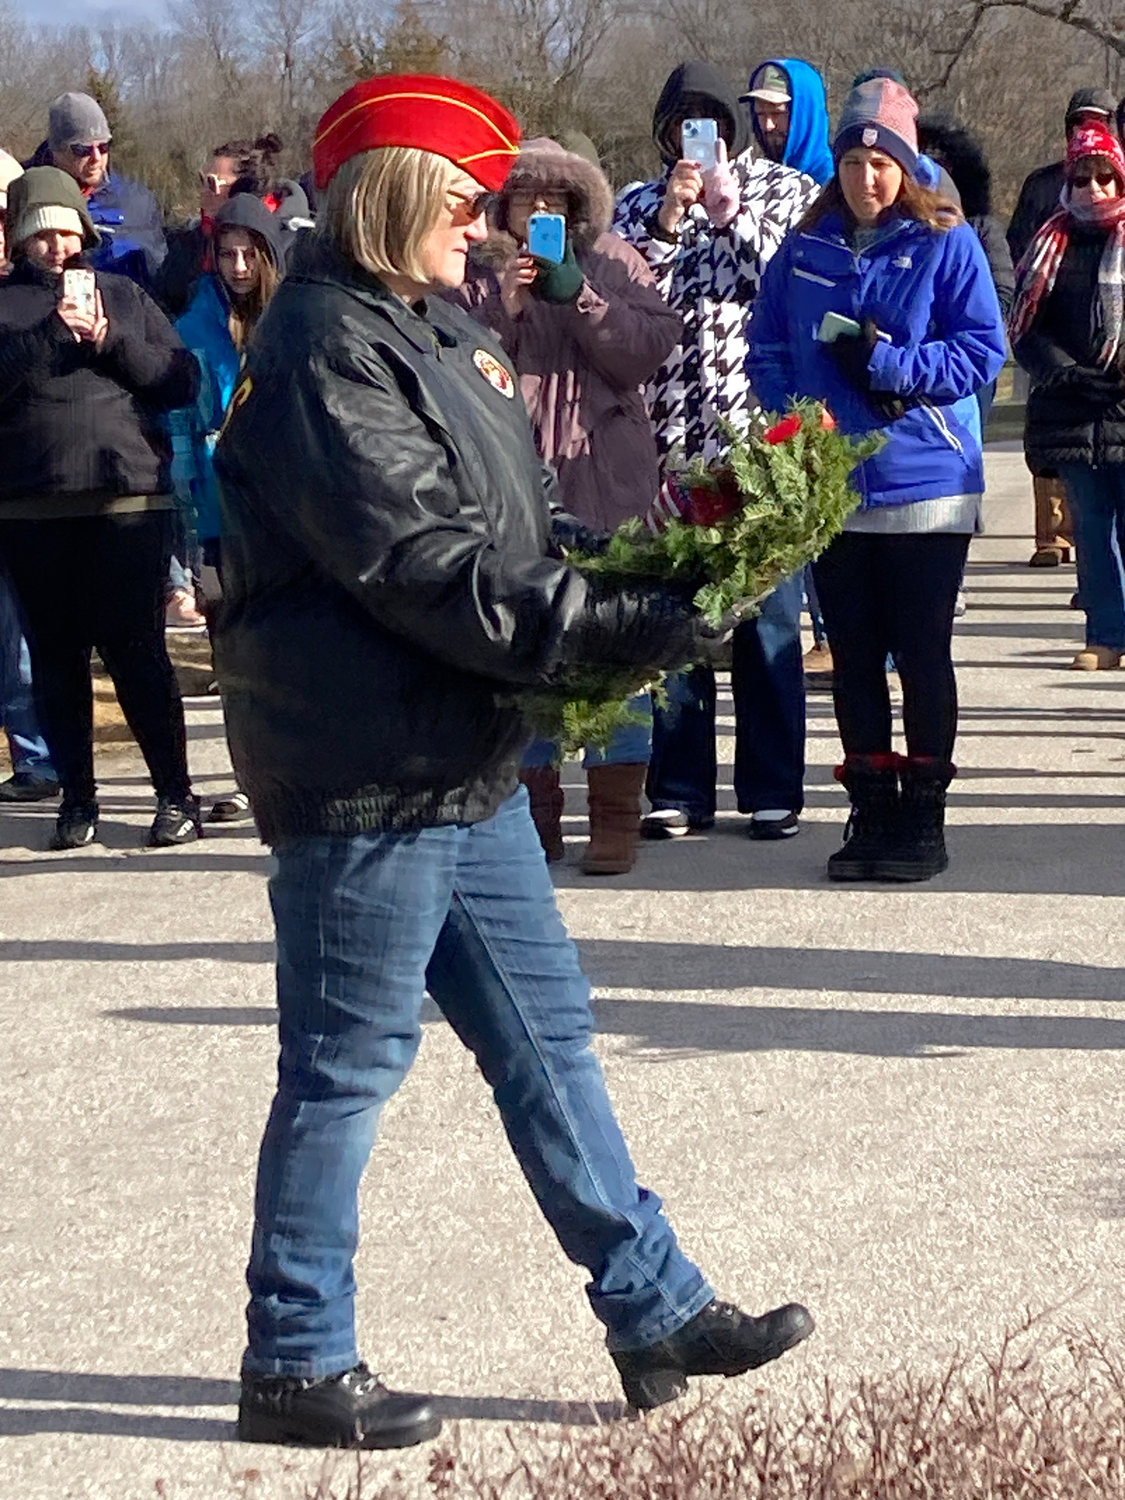 MILITARY HONORS — Julie Harris presents a memorial wreath in recognition of all members of the U.S. Marine Corps during a Wreaths Across America Ceremony at the Warrenton City Cemetery on Dec. 17. Each branch of the military, as well as servicemembers recorded as prisoners of war or missing in action, are memorialized at events throughout the nation each year.